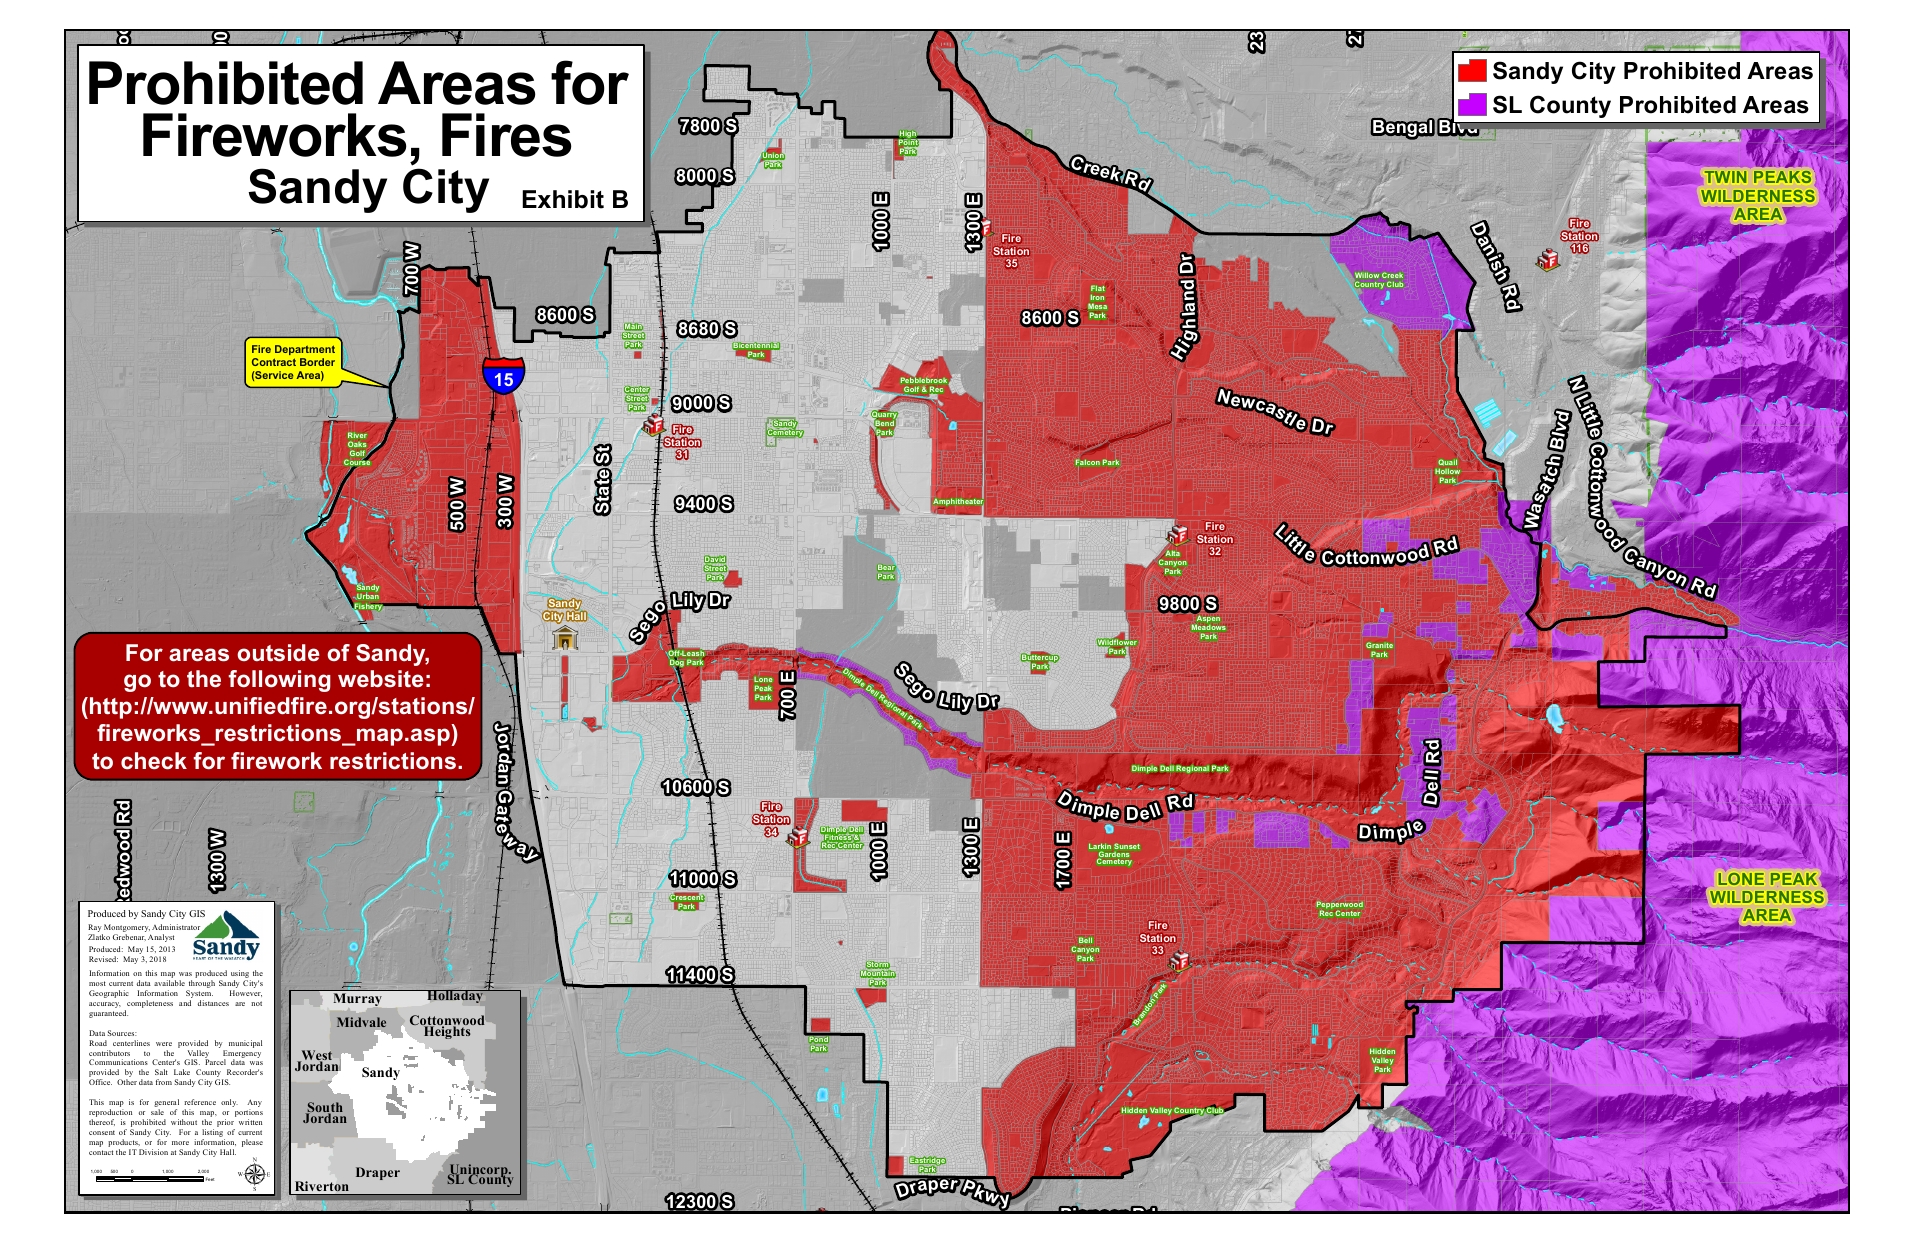 Sandy City issues new restrictions on where/when you can set off